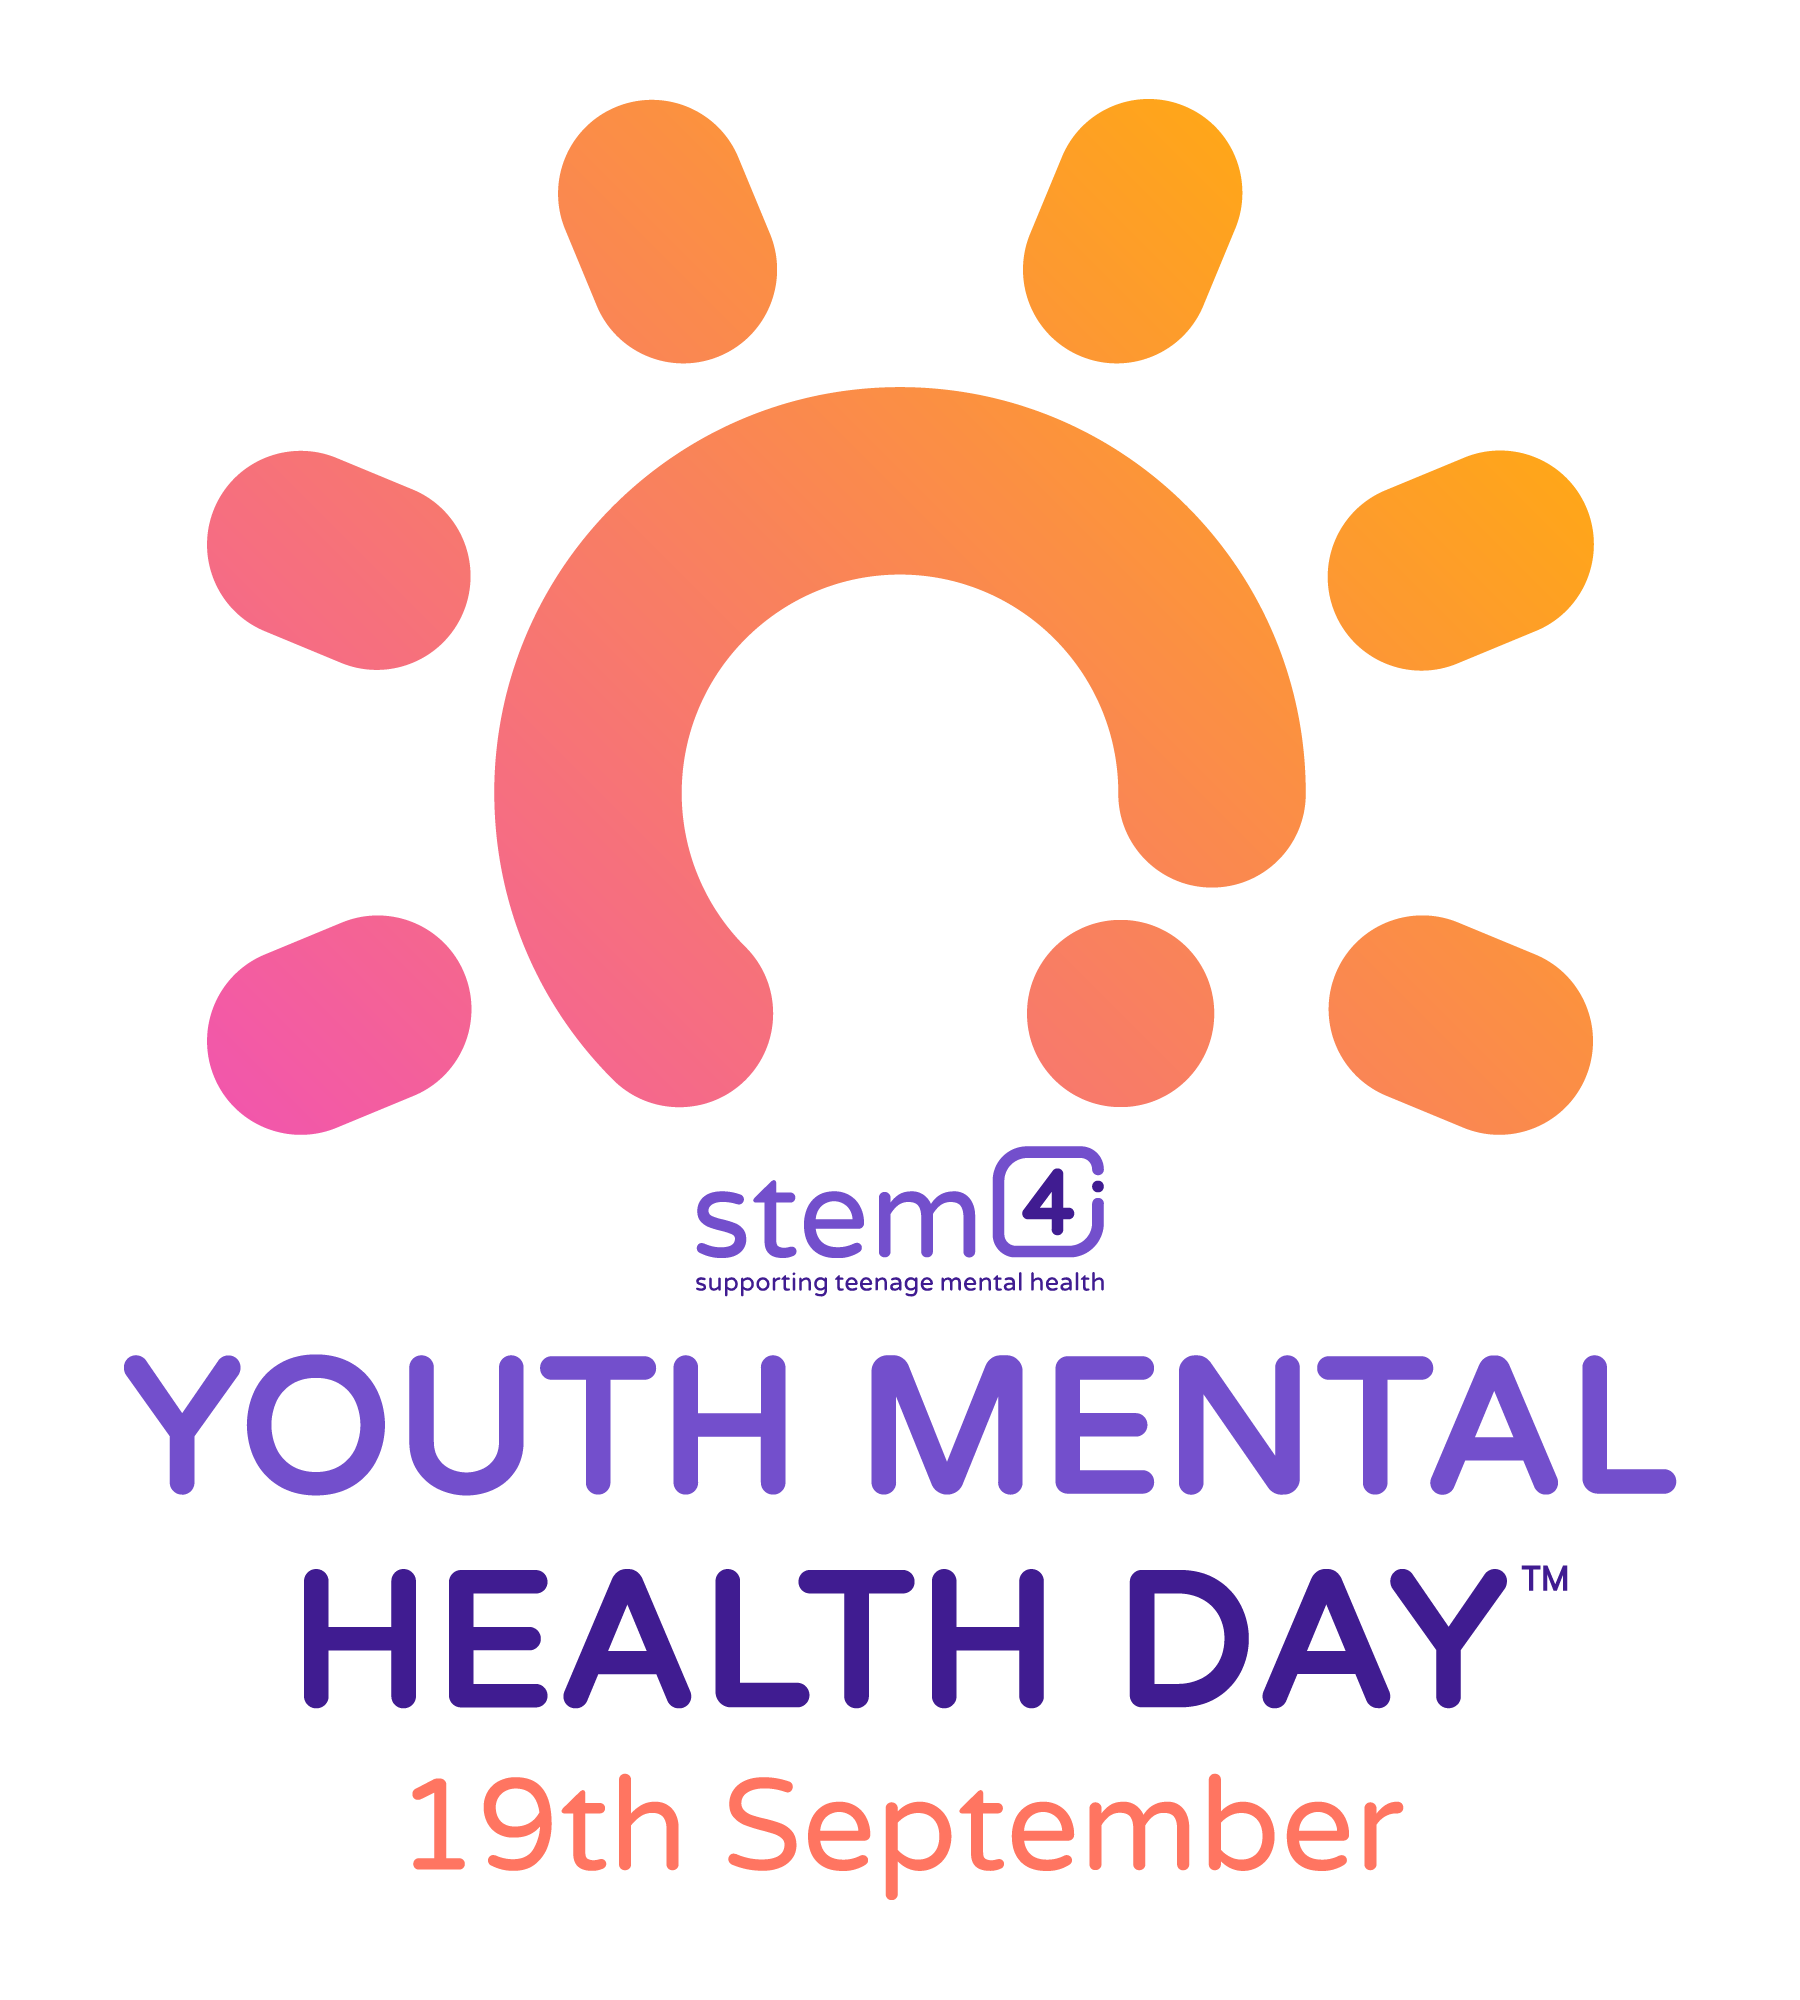 youth mental health day - 19th september